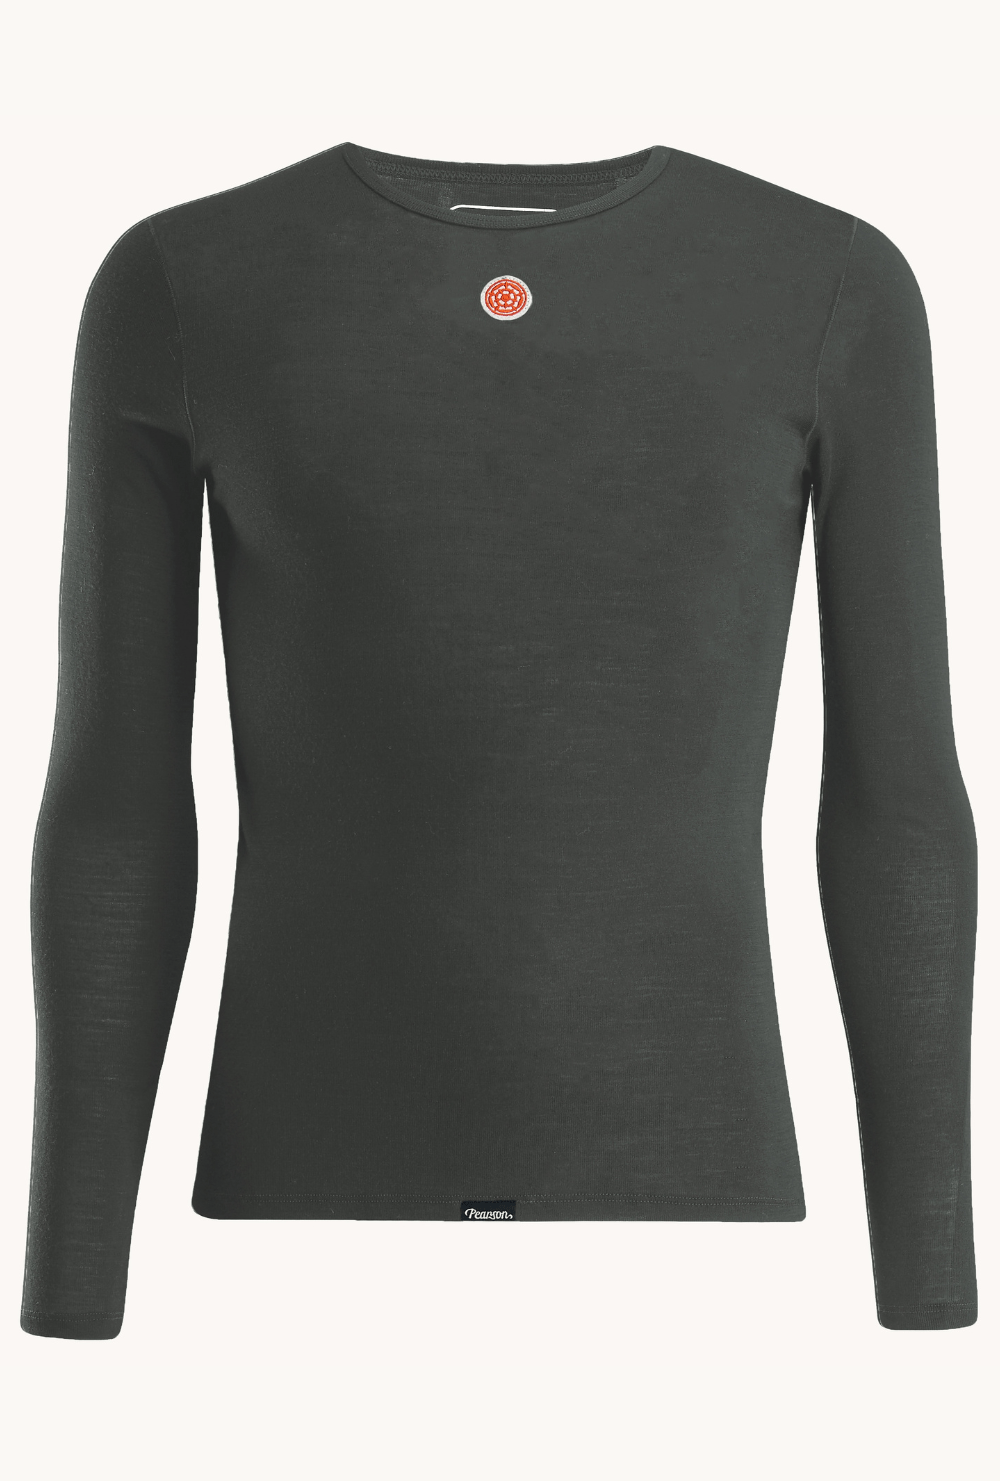 Pearson Cycles Pearson 1860, Skin in the Game - Long Sleeve Base Layer Iron Grey, Iron Grey / XX-Large